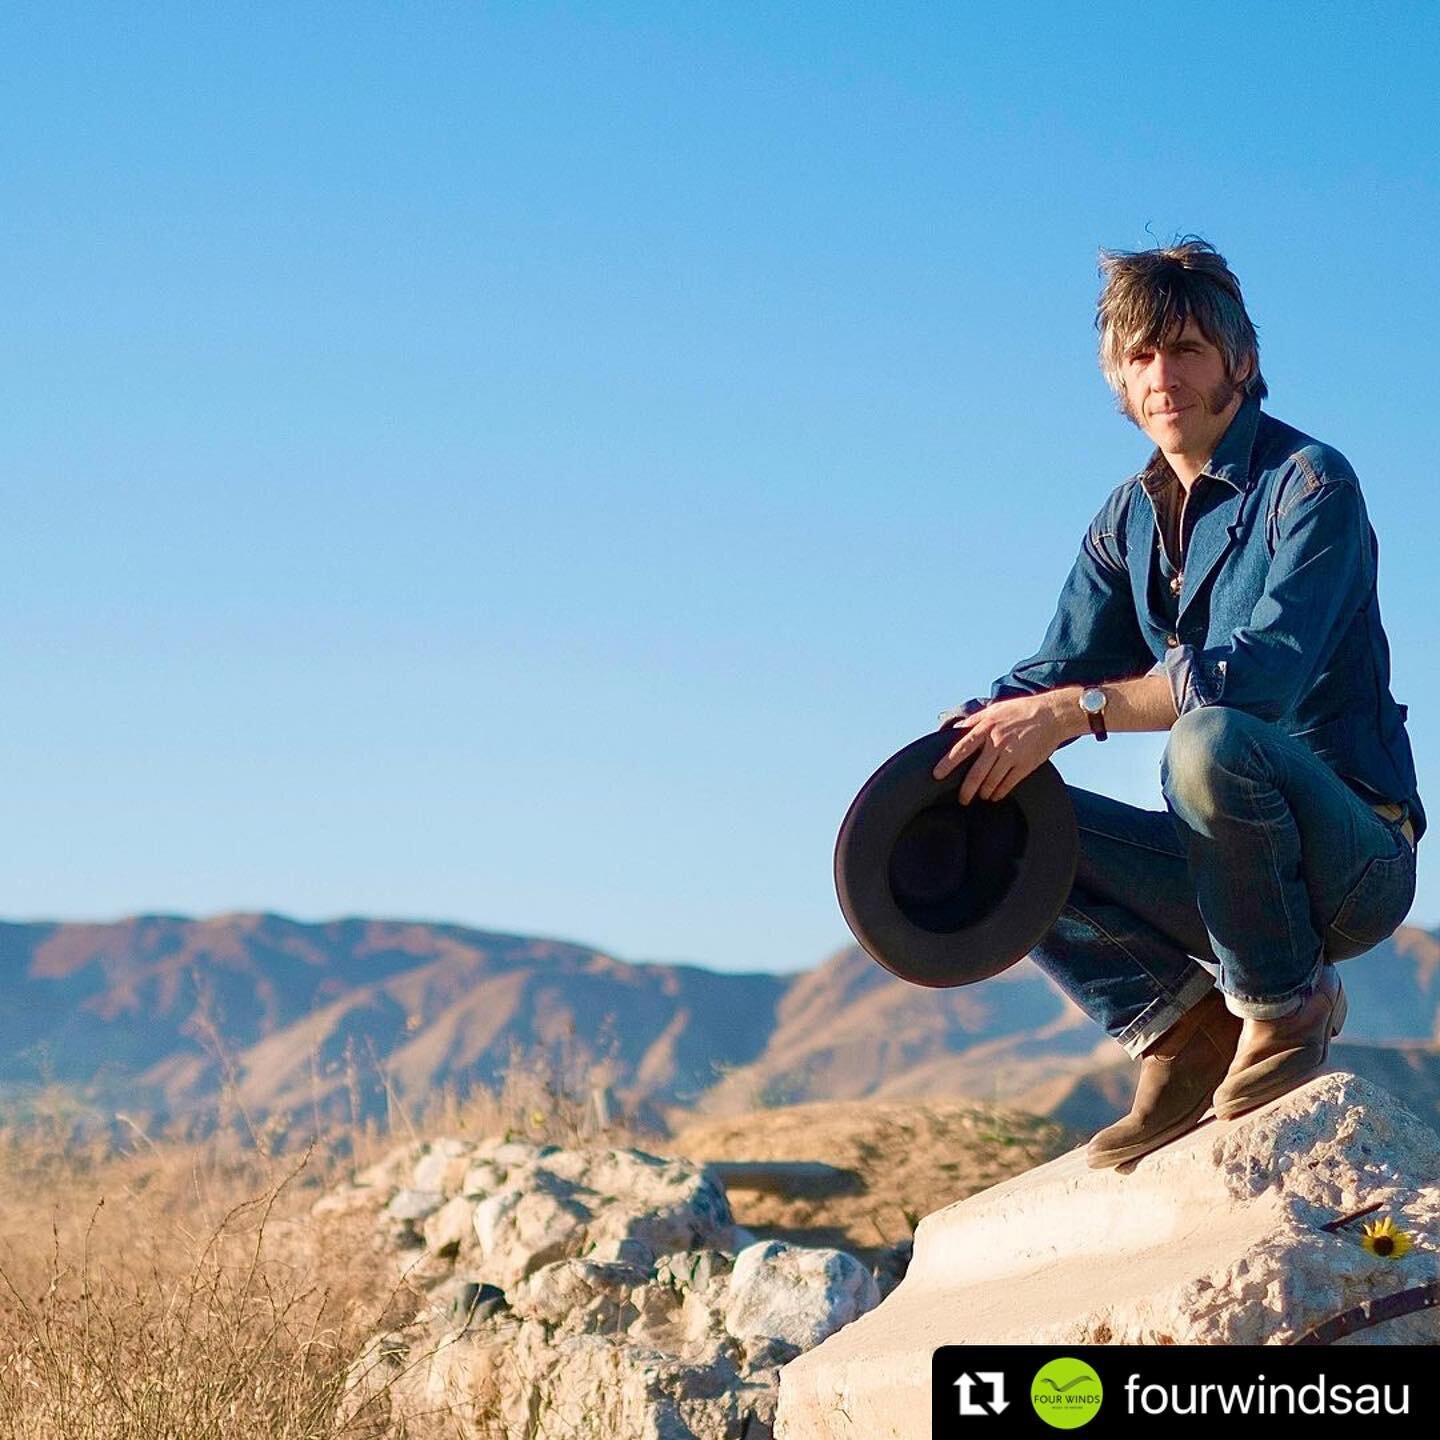 #Repost @fourwindsau with @use.repost
・・・
SUN 21 APRIL // Acclaimed local songman Heath Cullen + band invite audiences to take part in a special live concert recording. An exclusive peek behind the scenes as the music unfolds.

SUN 21 APRIL
3PM | DOO